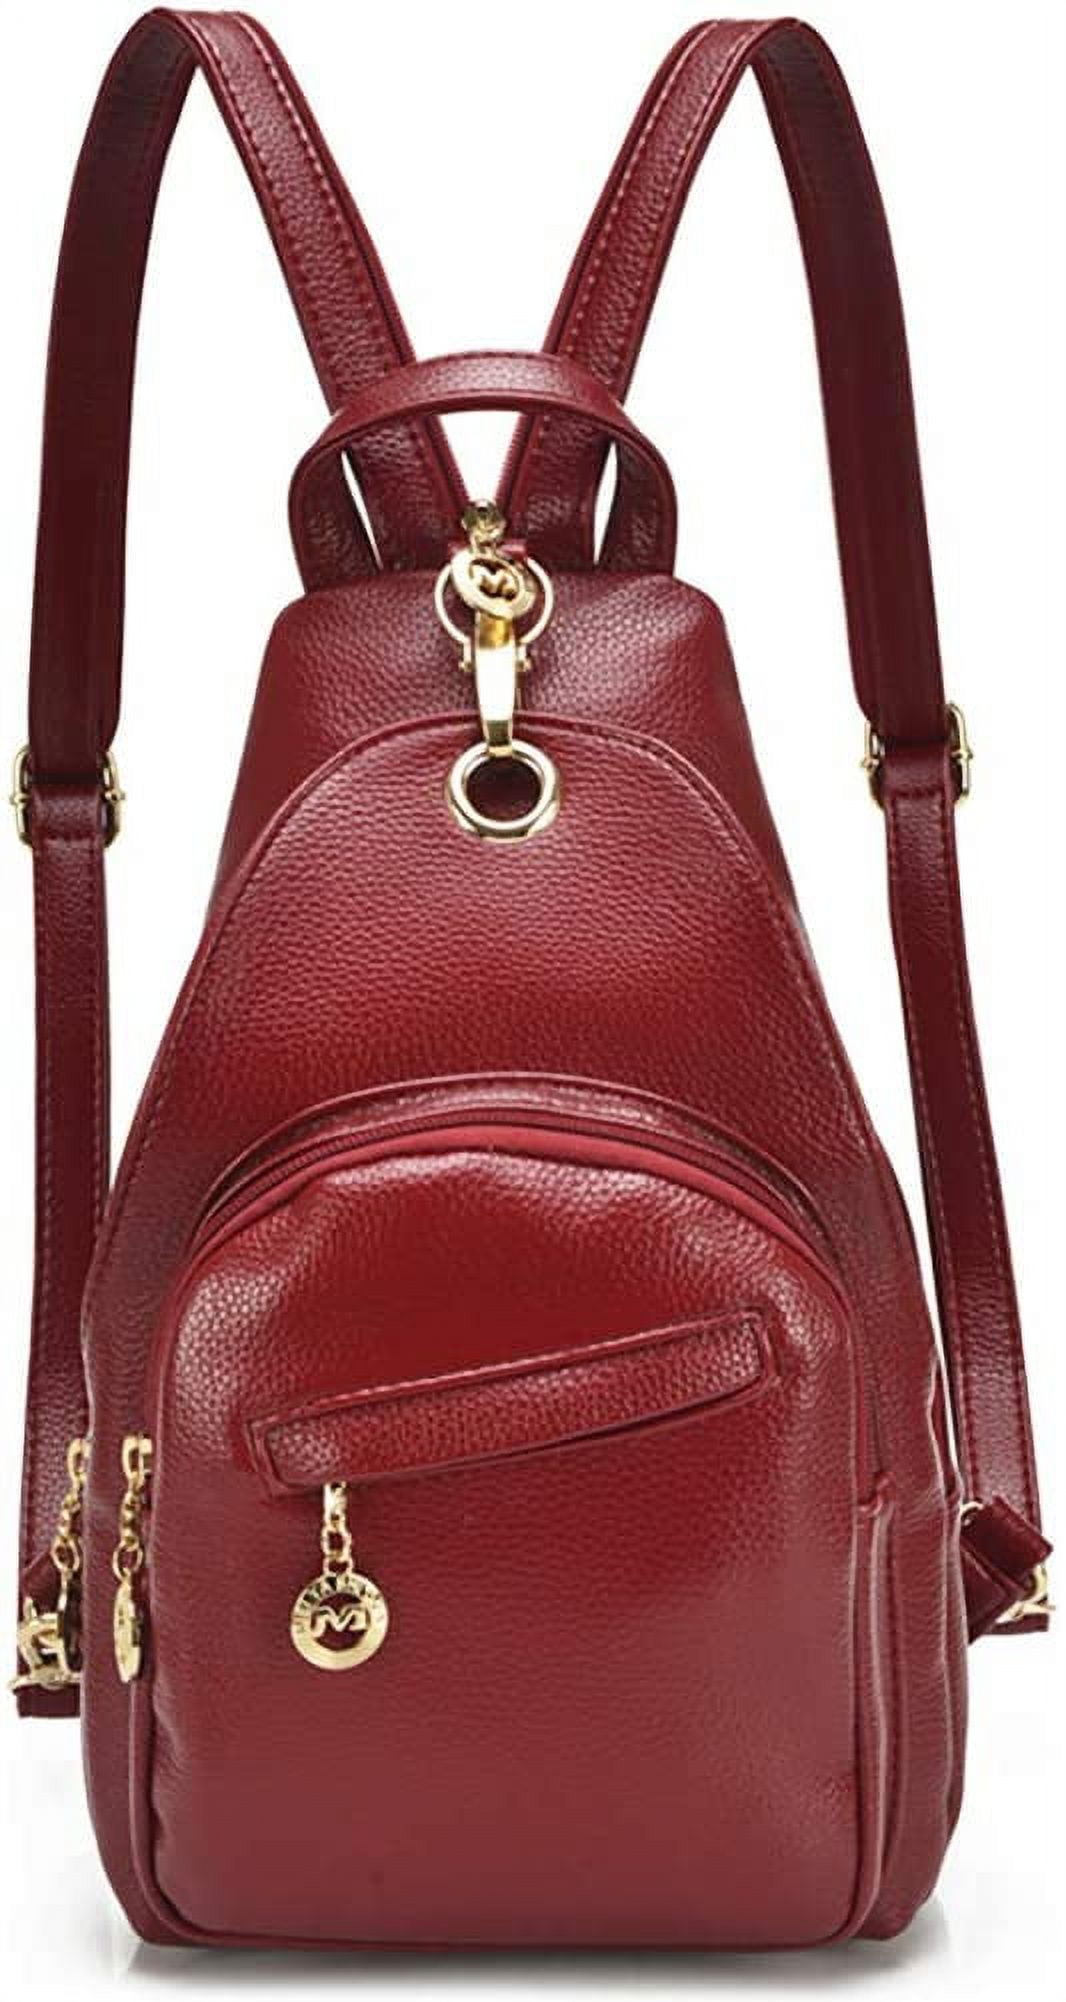  Small Leather Convertible Backpack Sling Purse